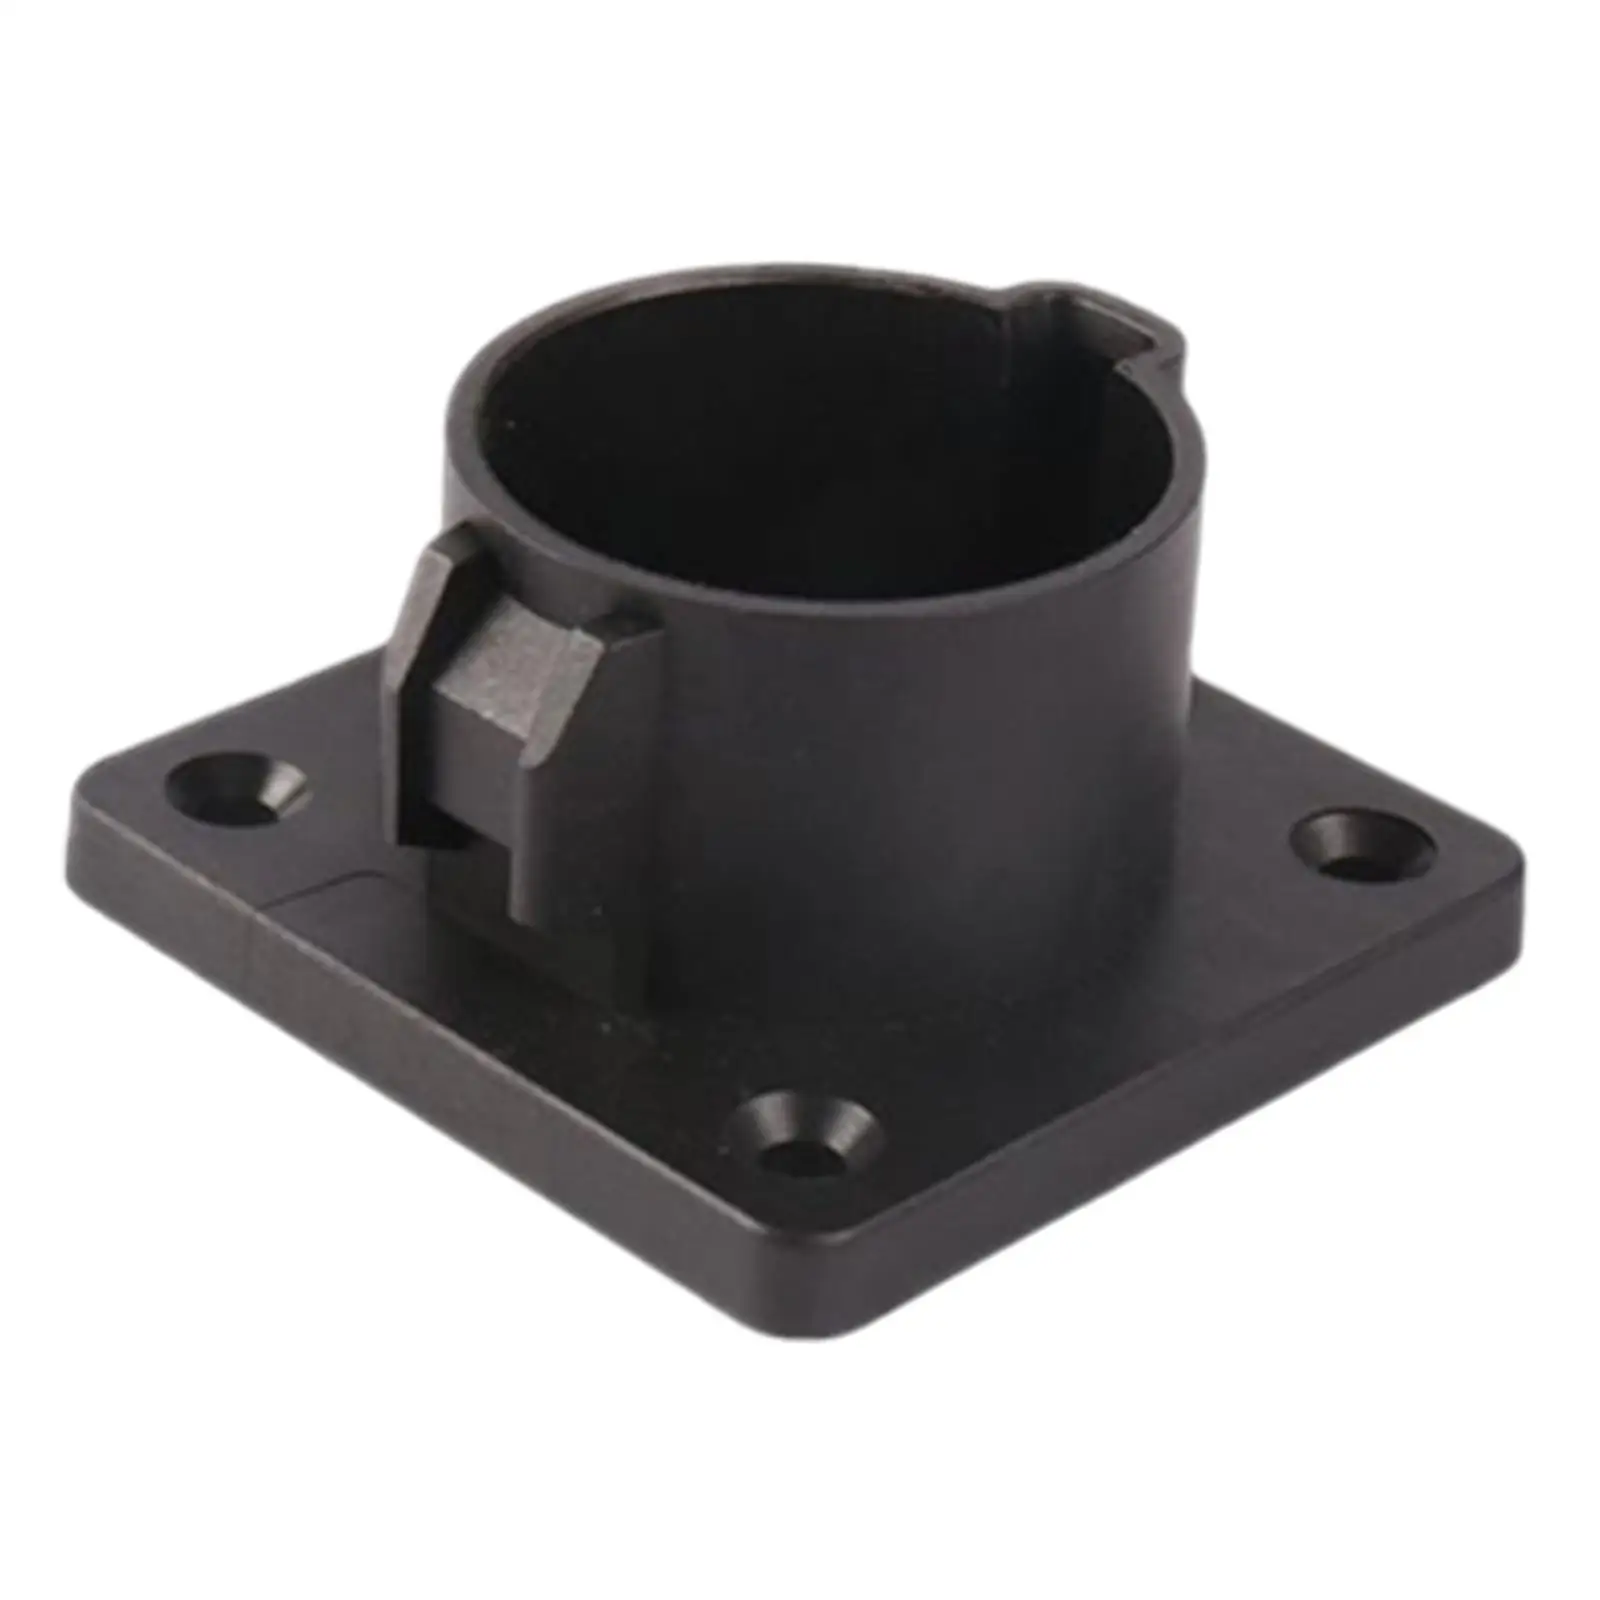   Dock ,5 Holes  Dock Charging Plug Holder Fits for SAE J1772 Connector Easy Installation Vehicle Parts Car Supplies